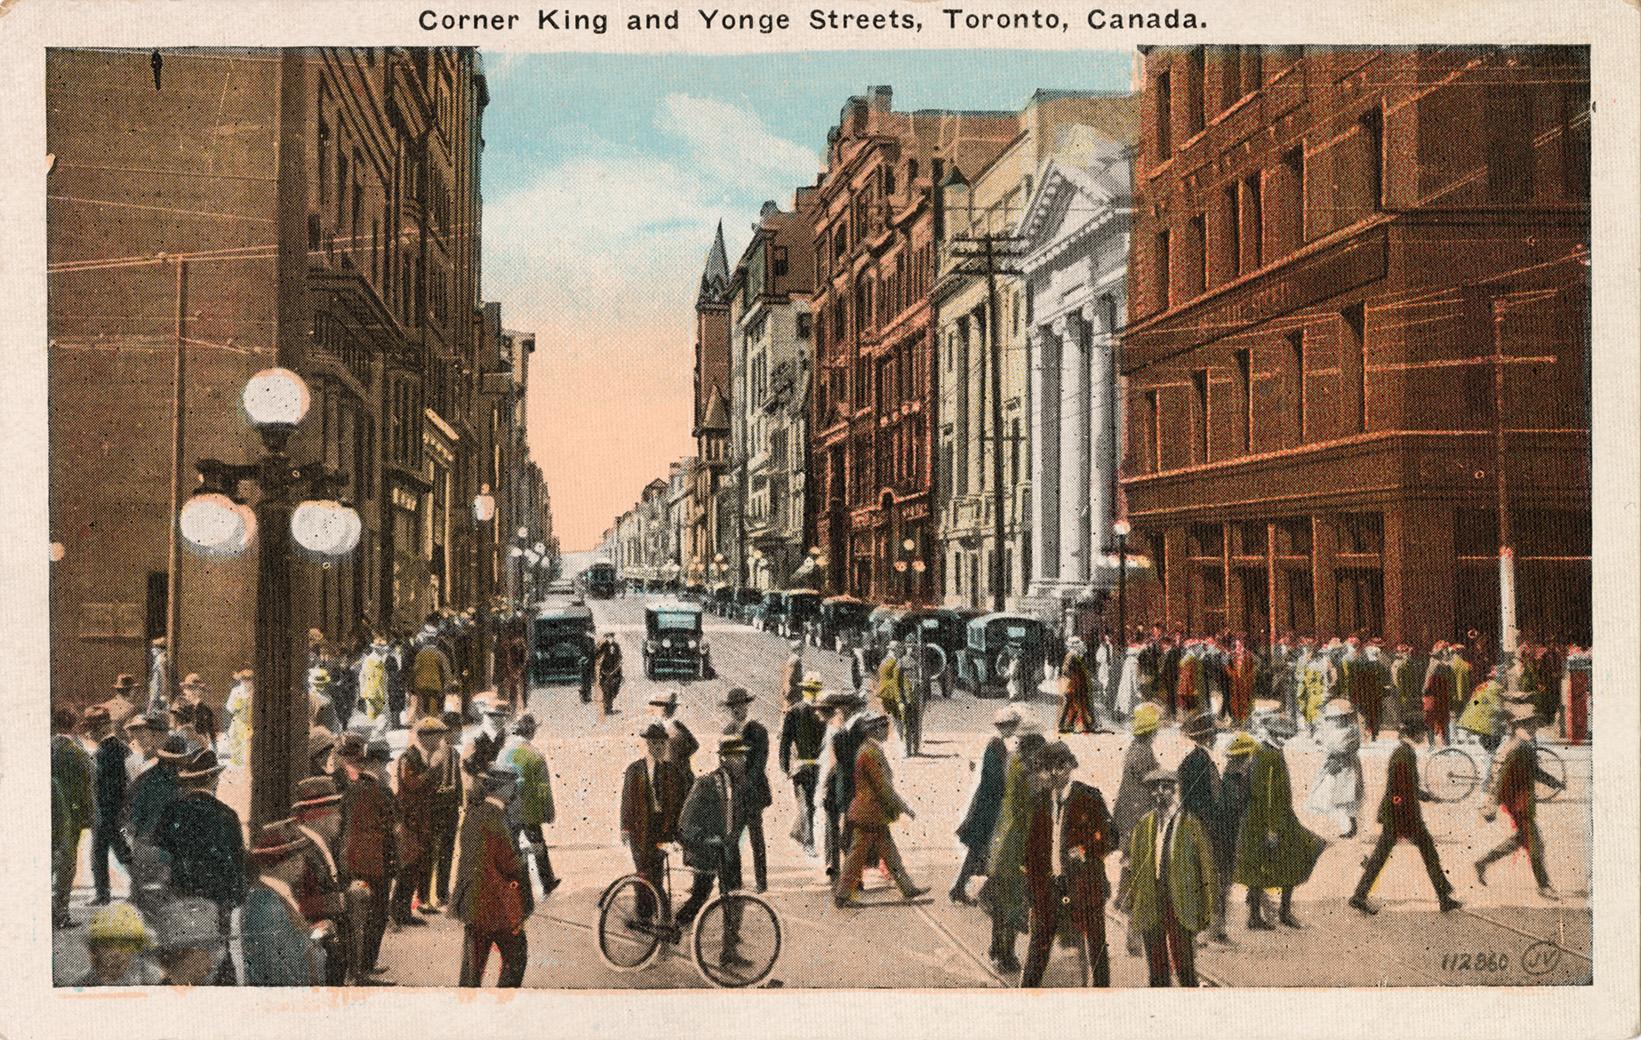 Colorized photograph of a busy downtown intersection with people crossing the street.
